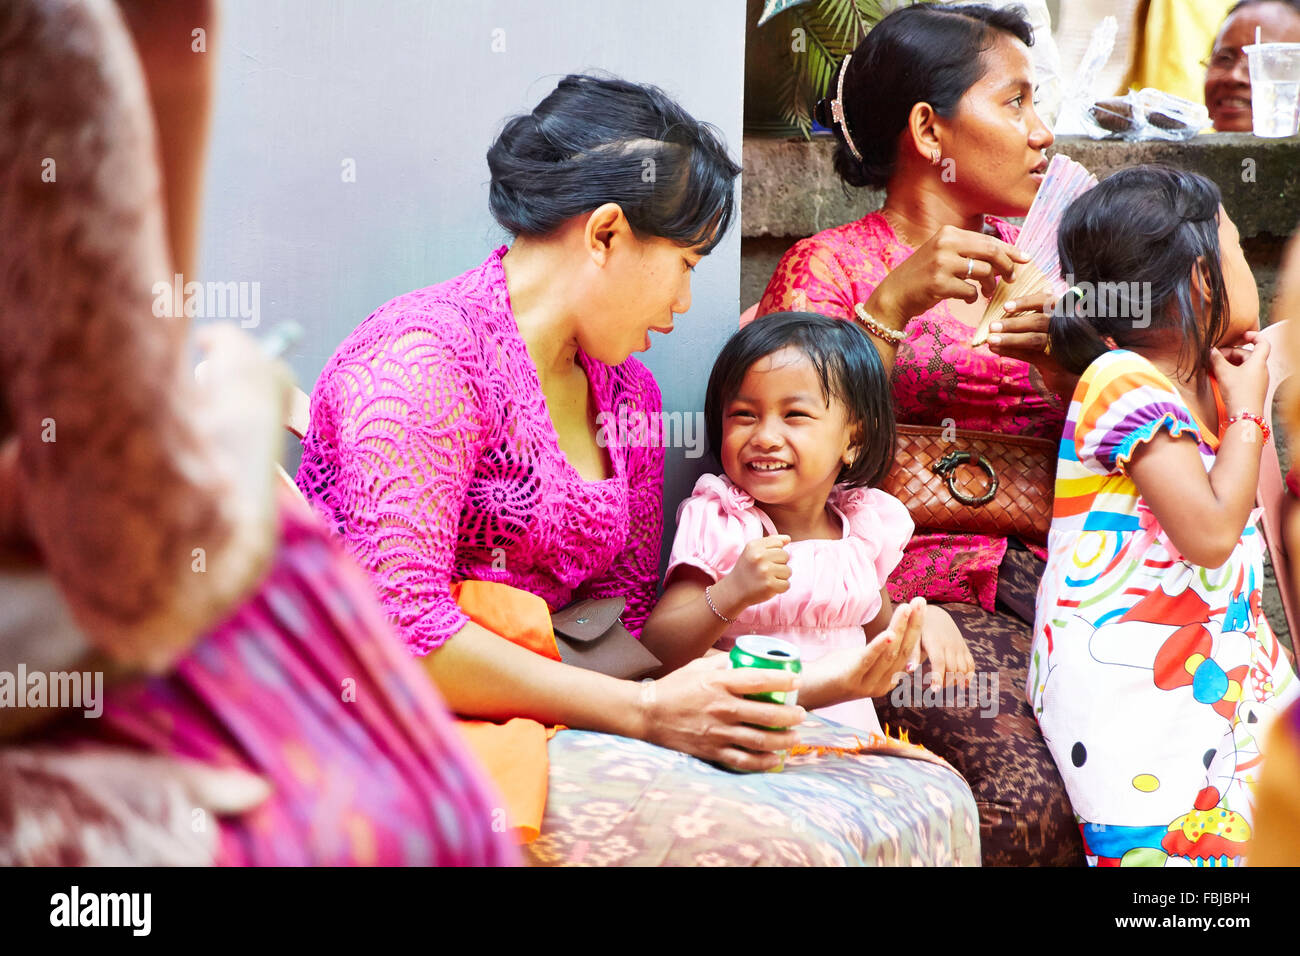 Mother playing with daughter, little girl laughing, reportage, traditional wedding, Bali, Indonesia, Asia Stock Photo